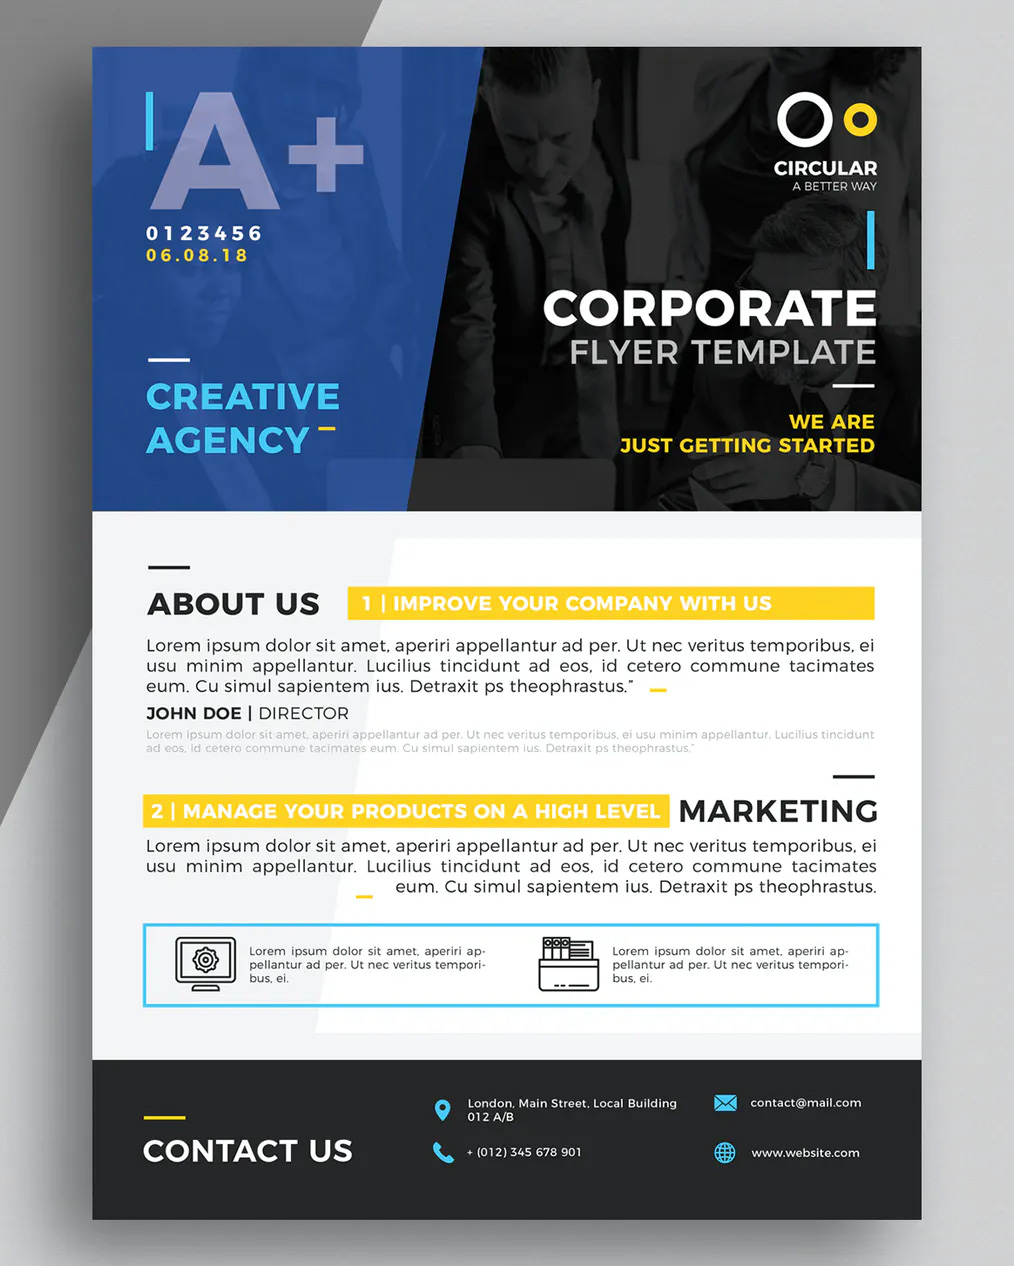 Corporate flyer layout